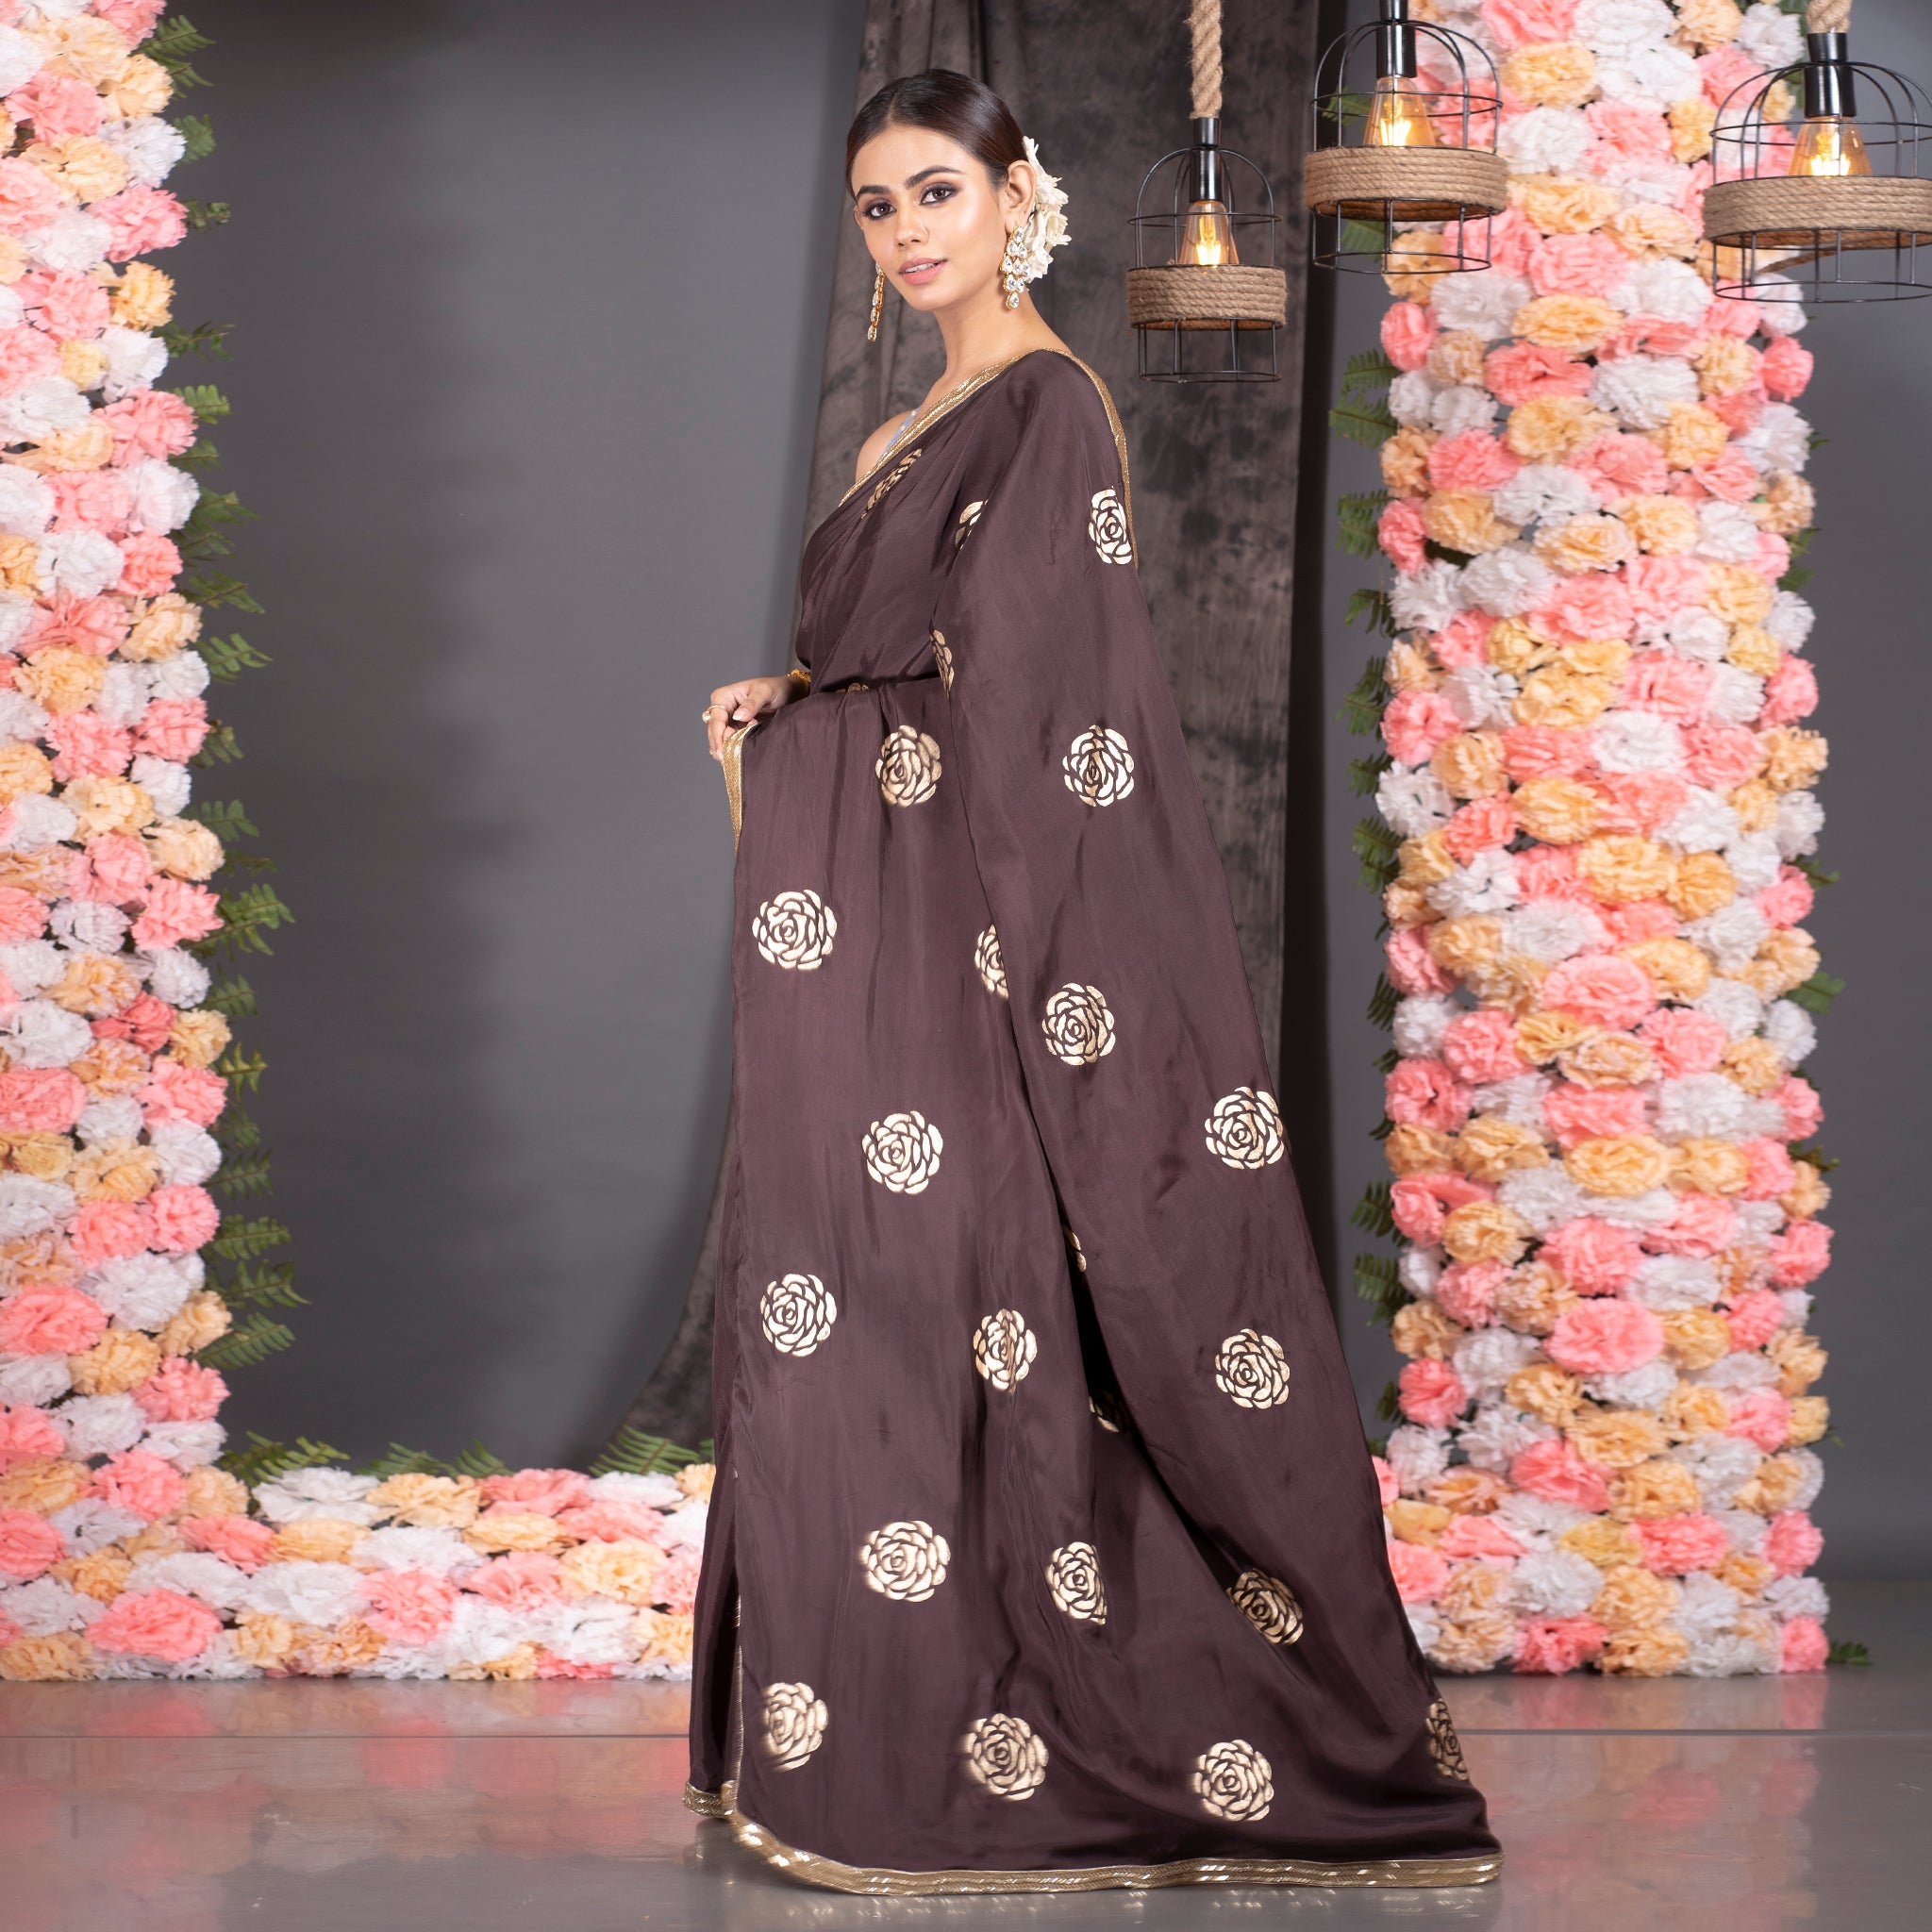 Women's Chocolate Brown Habutai Silk Saree With Gold Print And Hand Embroidered Lace Border - Boveee